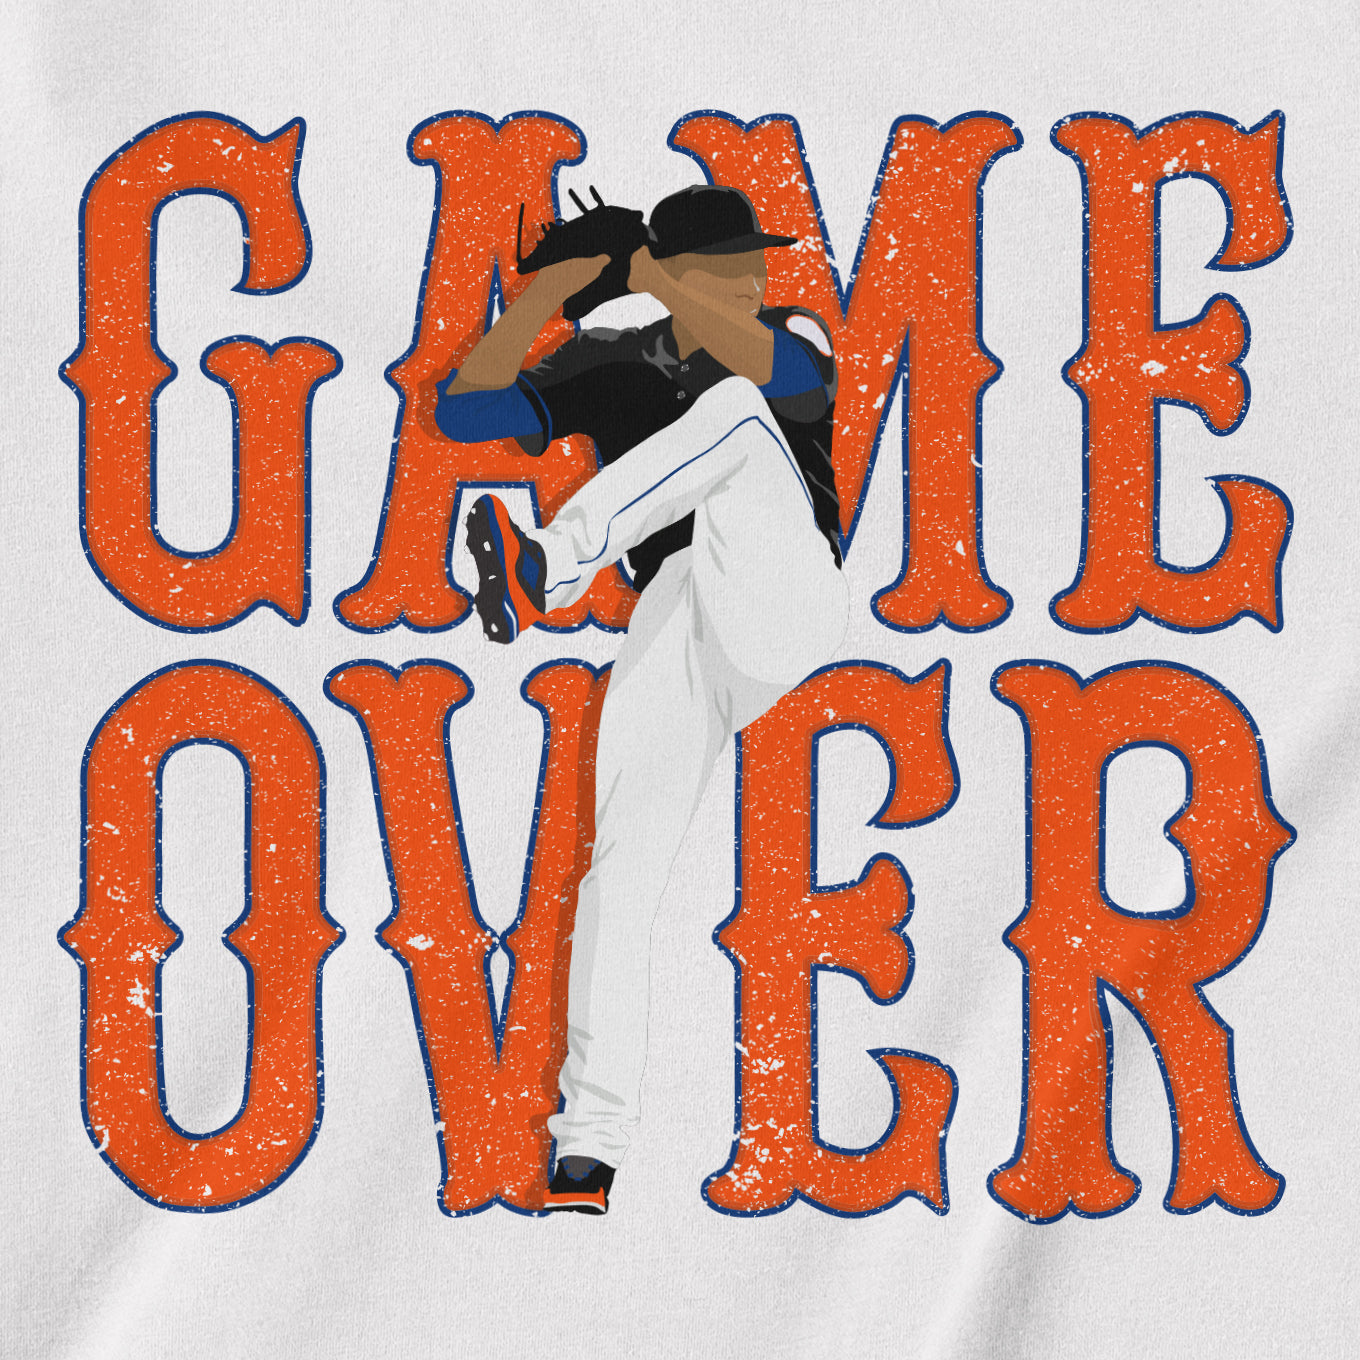 Game Over | T-Shirt